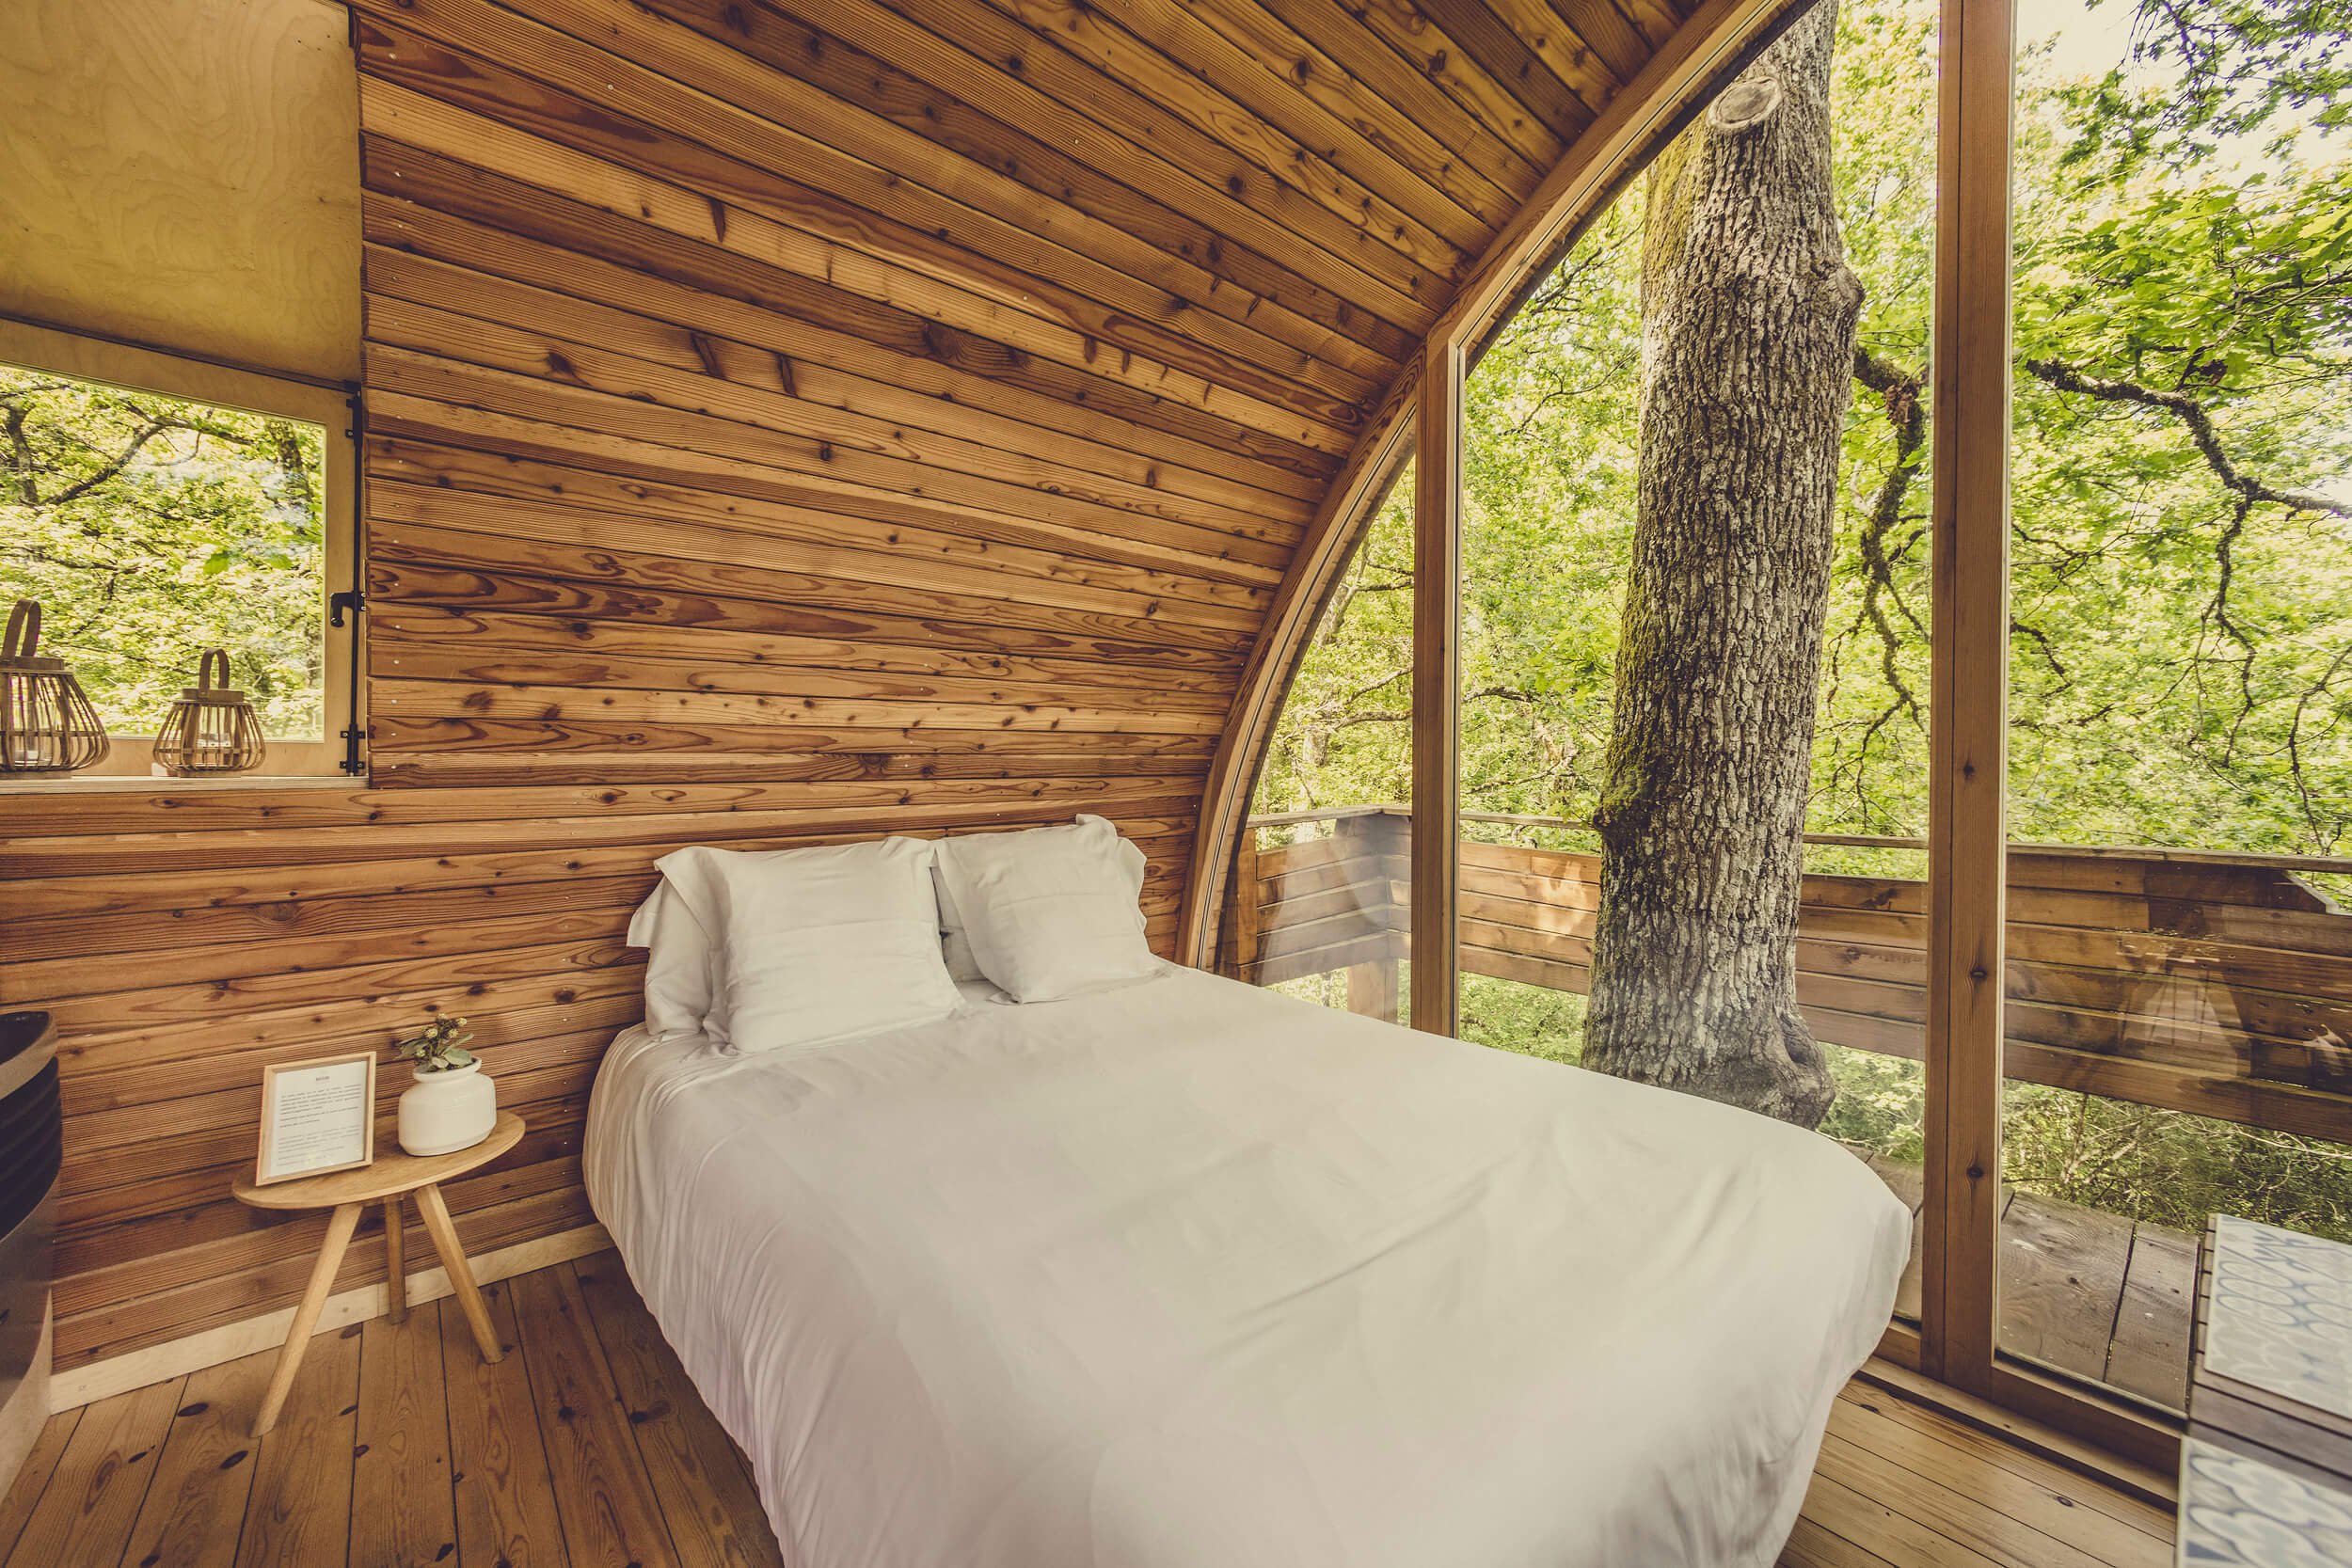 Escape to the forest- a look inside Basoa Suites' treehouses by MuruStudios advertising photographers in Madrid Barcelona Pamplona Spain 42.jpg